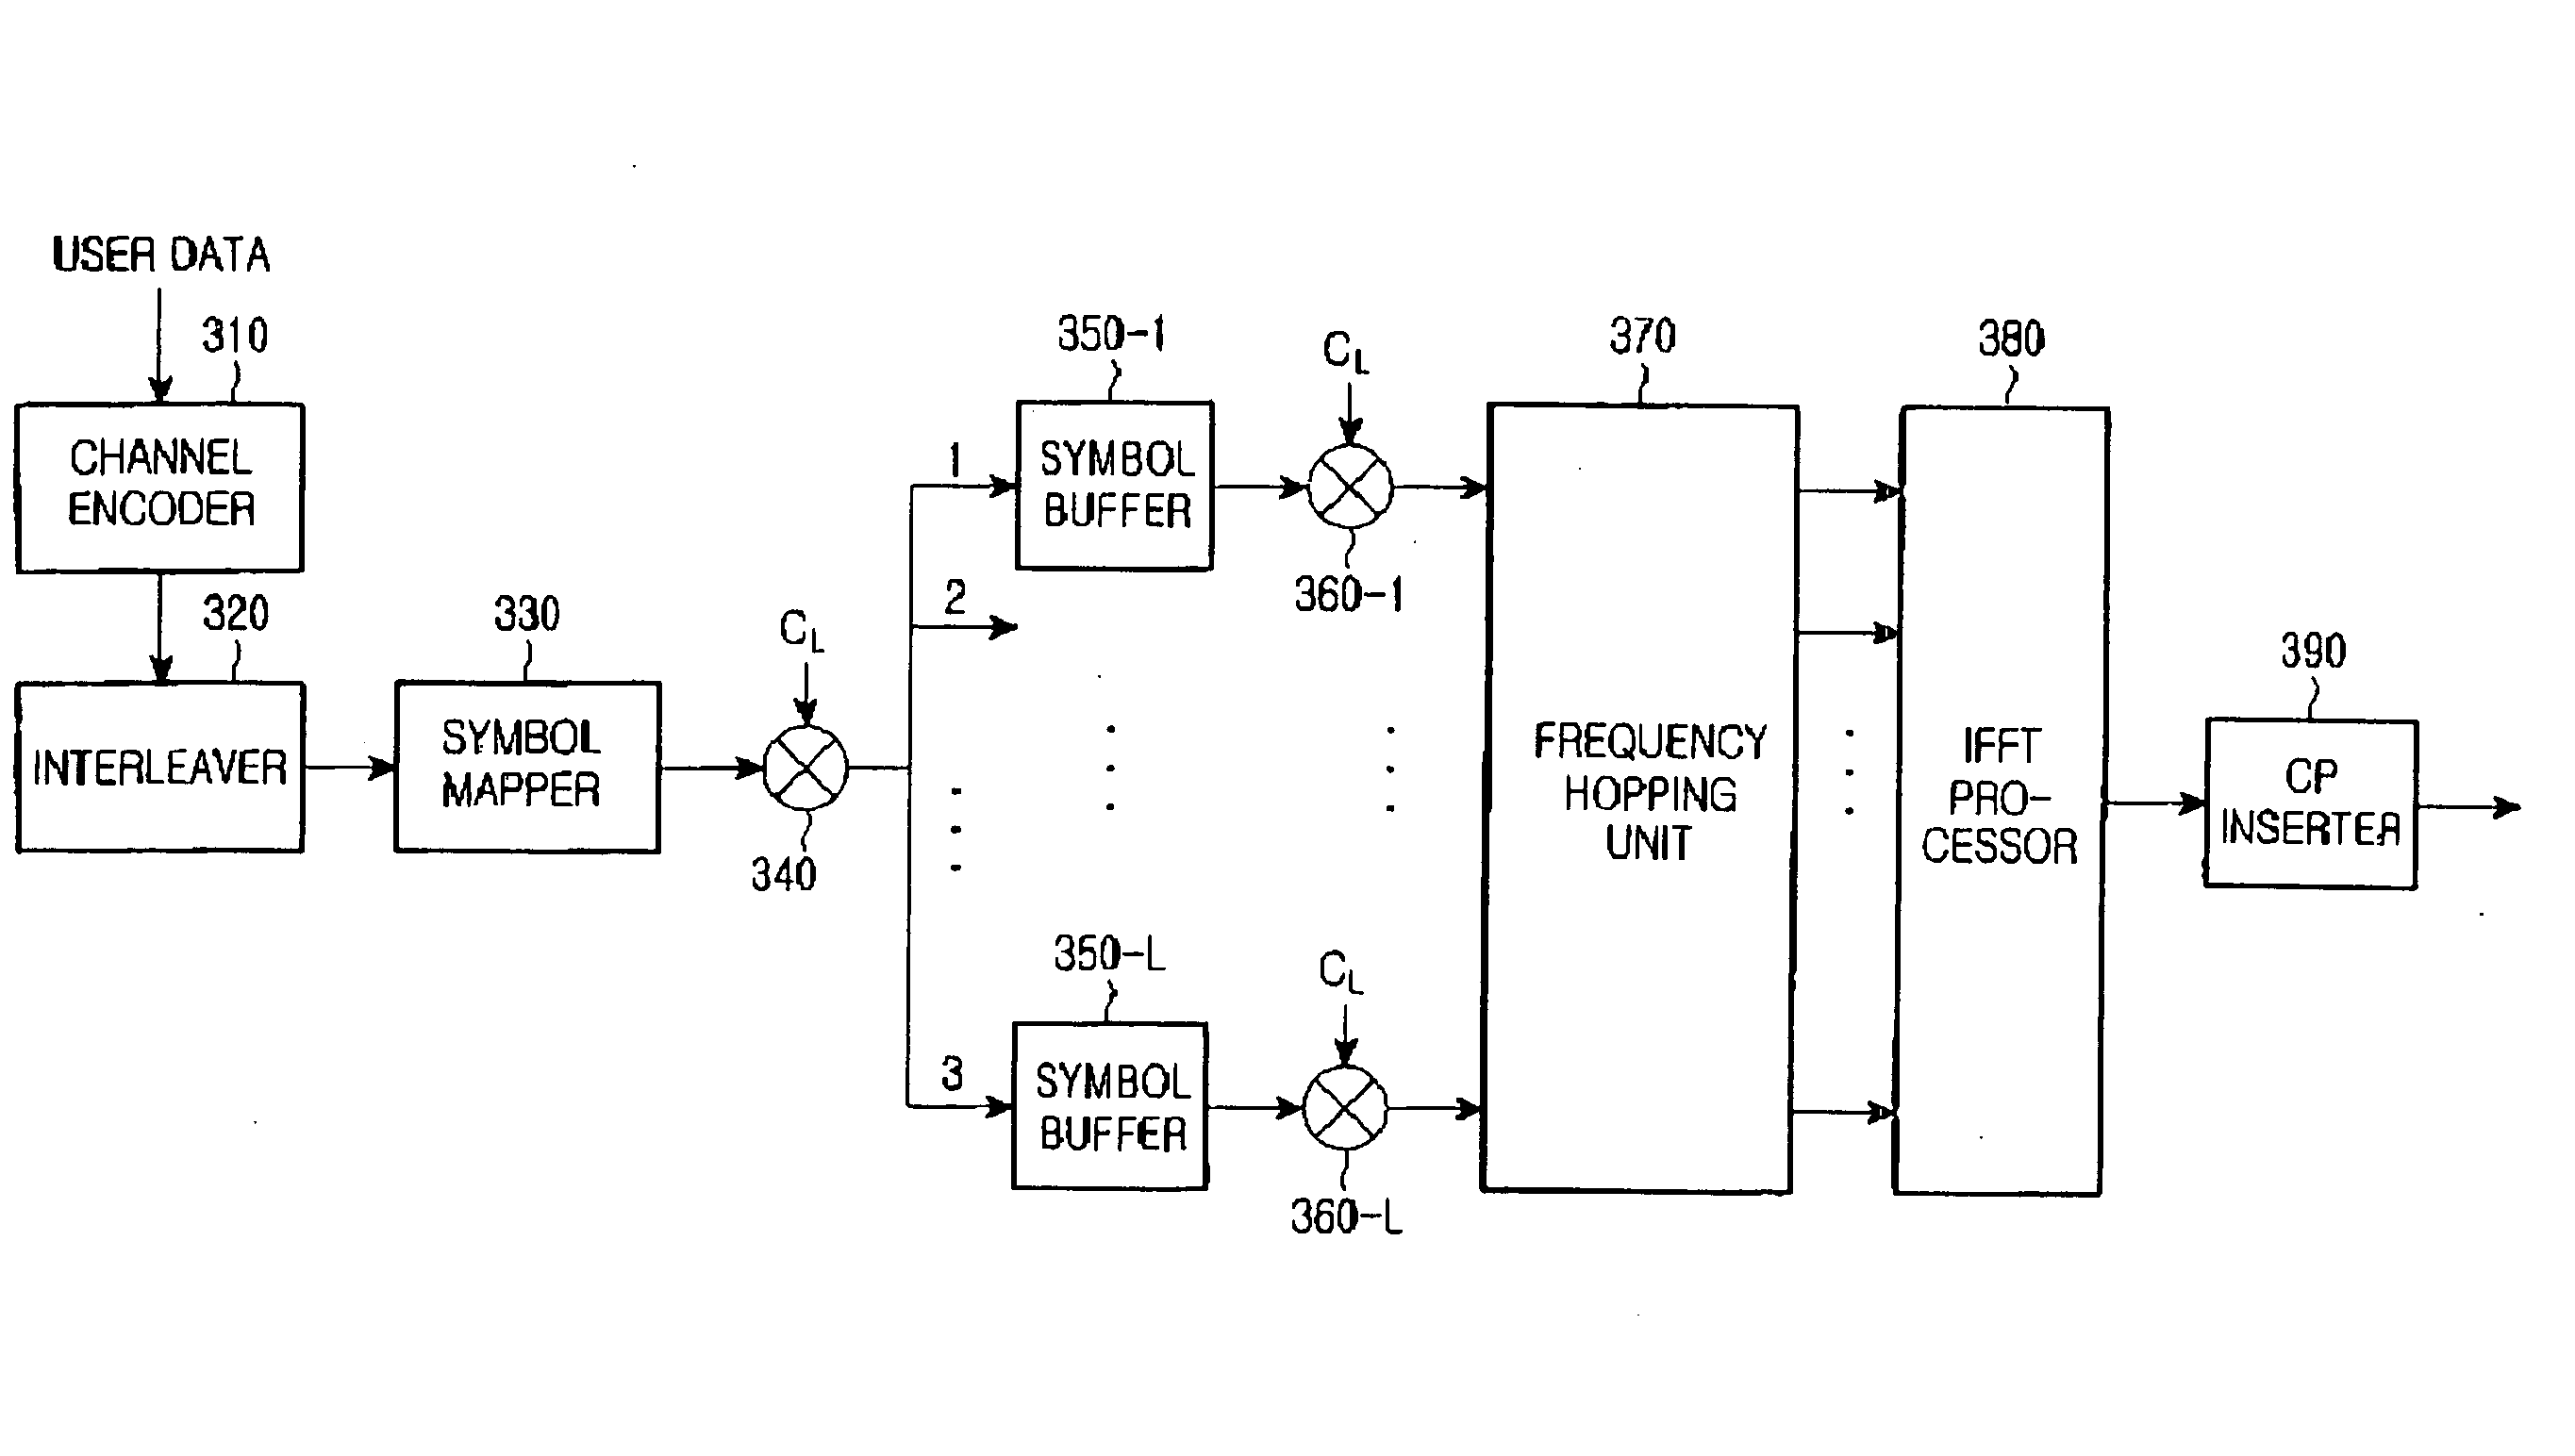 Two-dimensional spreading method for an OFDM-CDM system